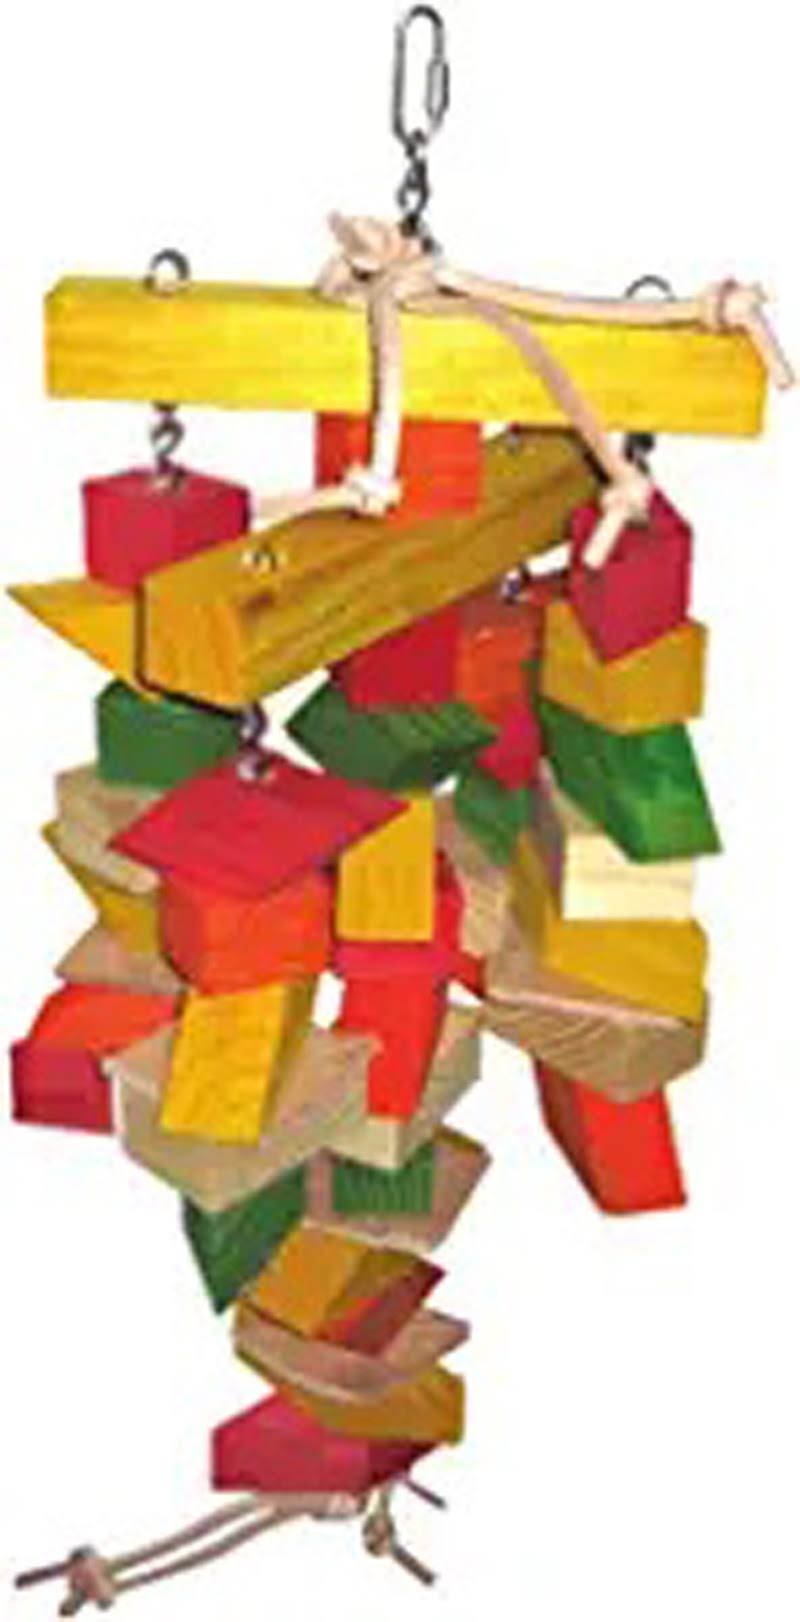 A&E Cage Company Parallelogram Large Wooden Bird Toy, 1 Each